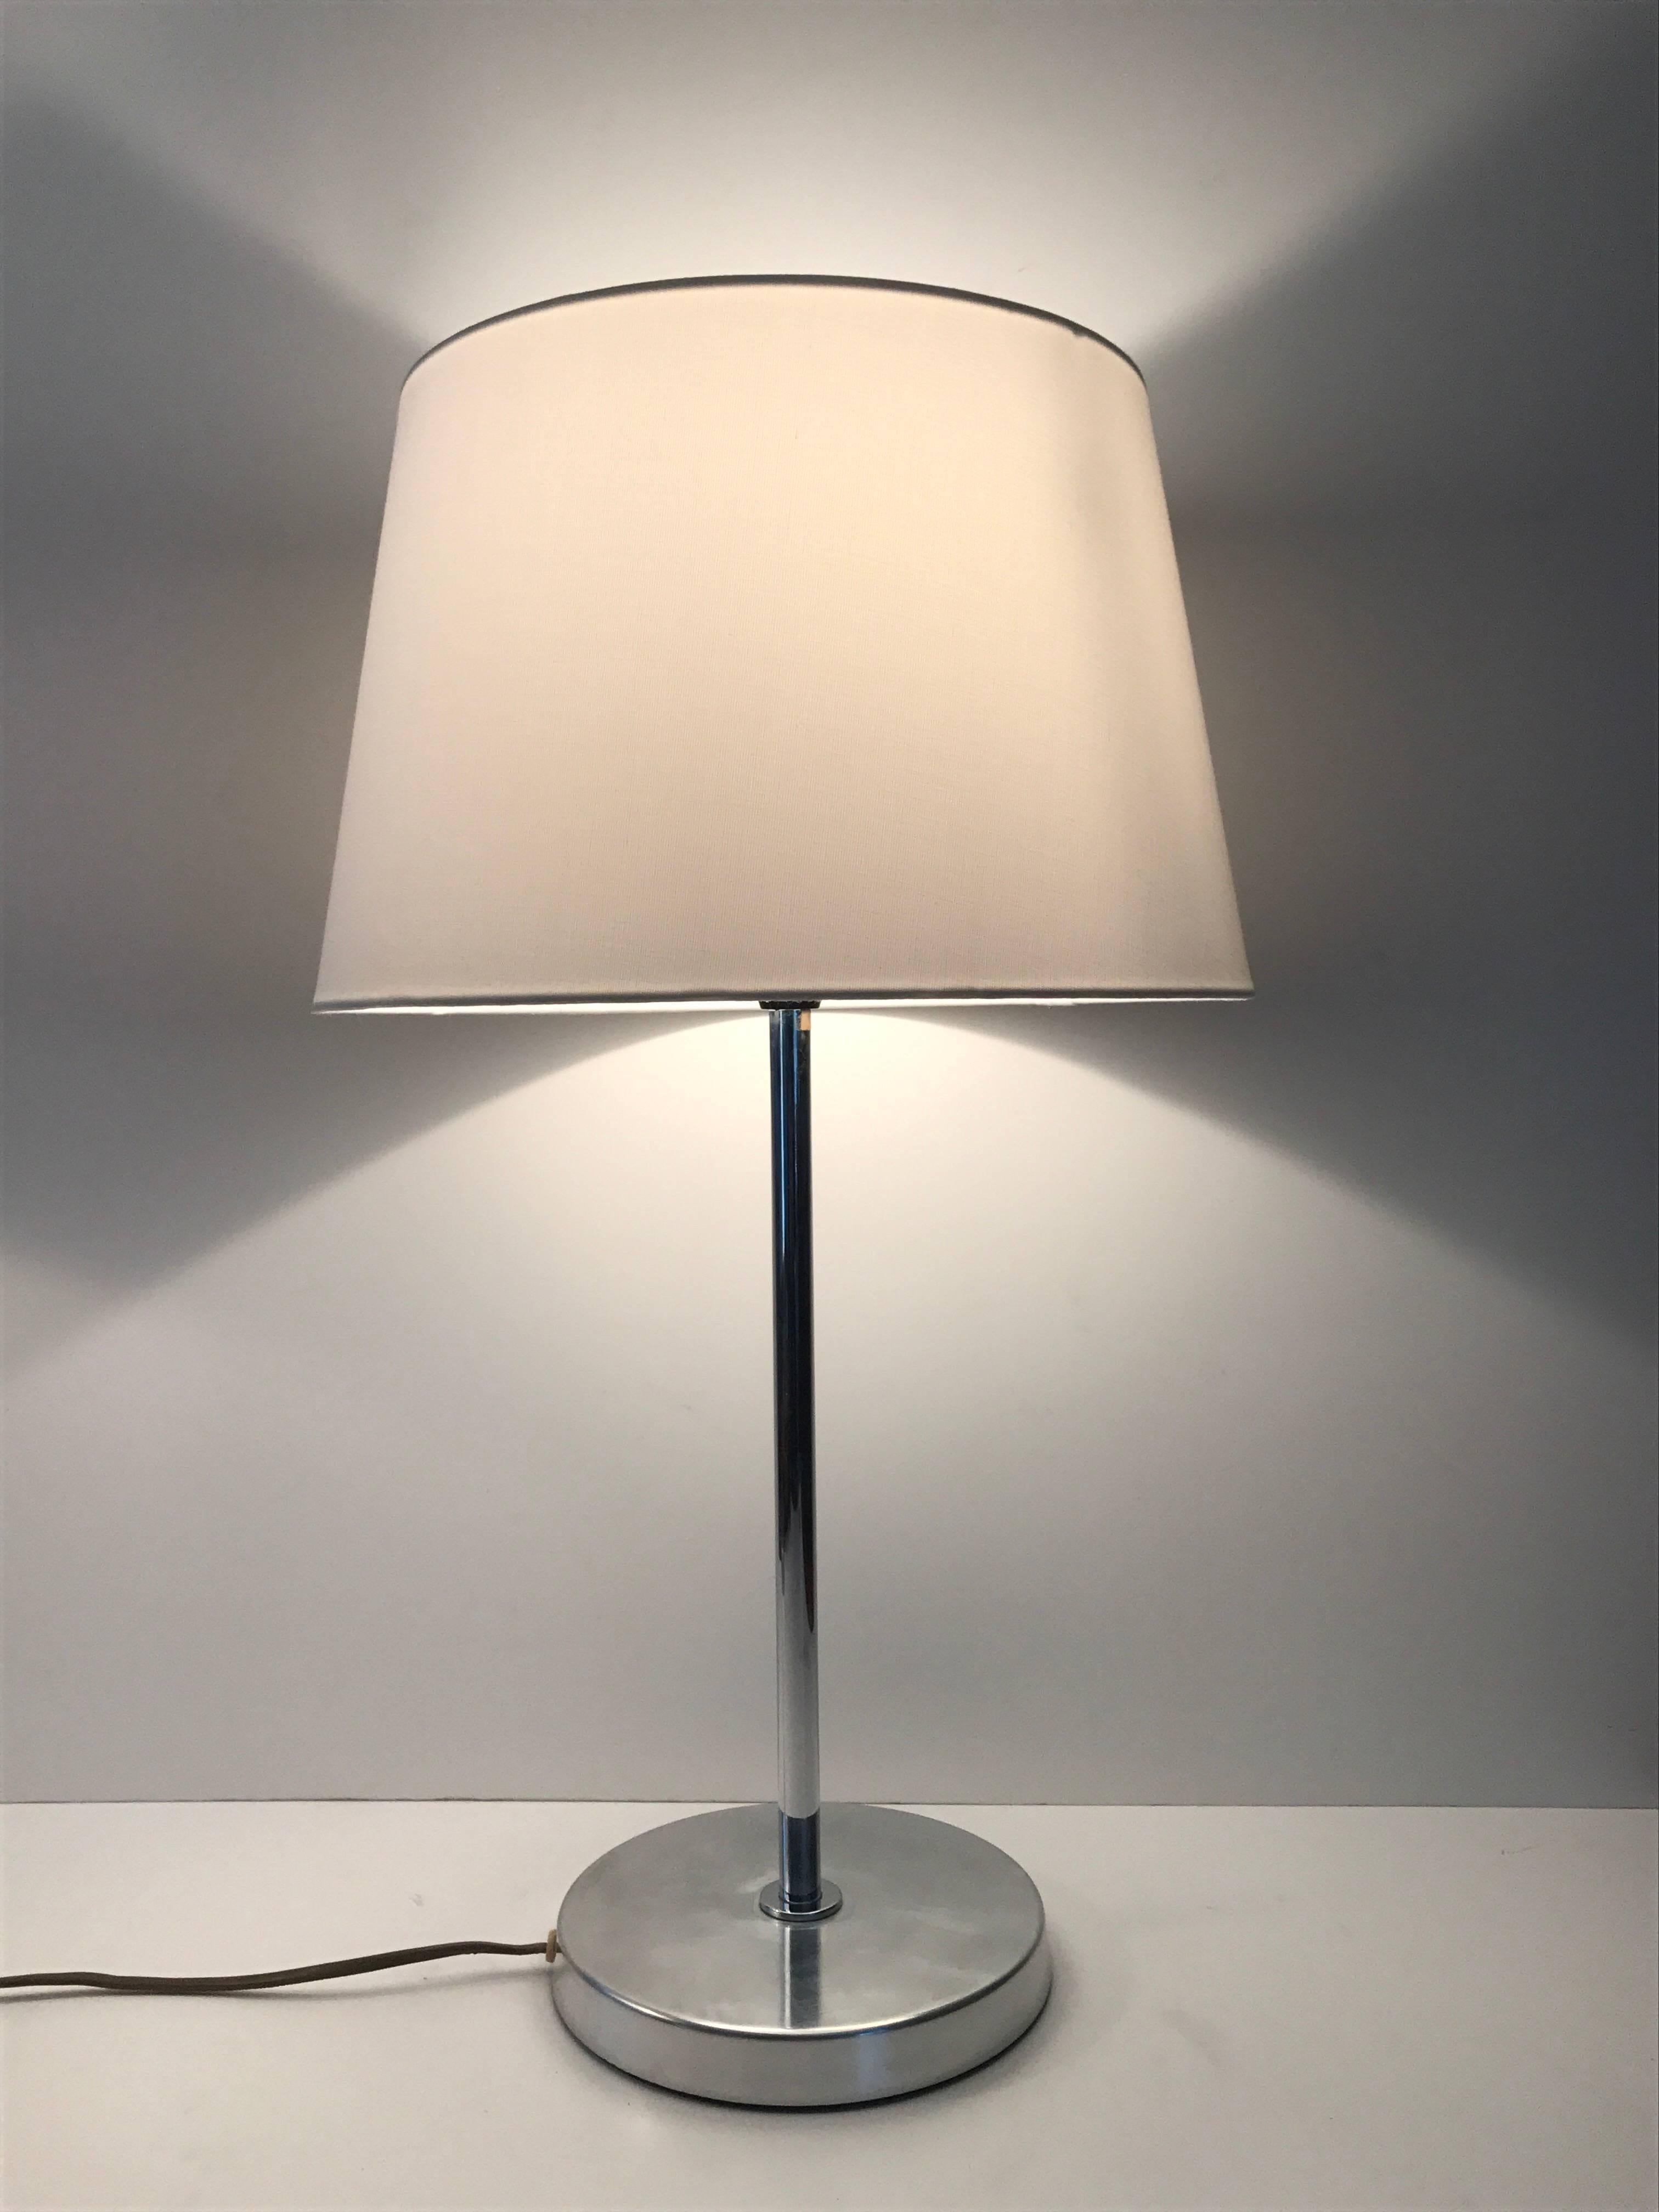 Pair of Swedish Bergboms steel table lamps, 1955. Another pair of simple but yet very elegant and Classic Swedish designed lamps by Bergboms. This pair is made of steel and has a chromed centre rod. They are marked with a sticker that says Bergboms